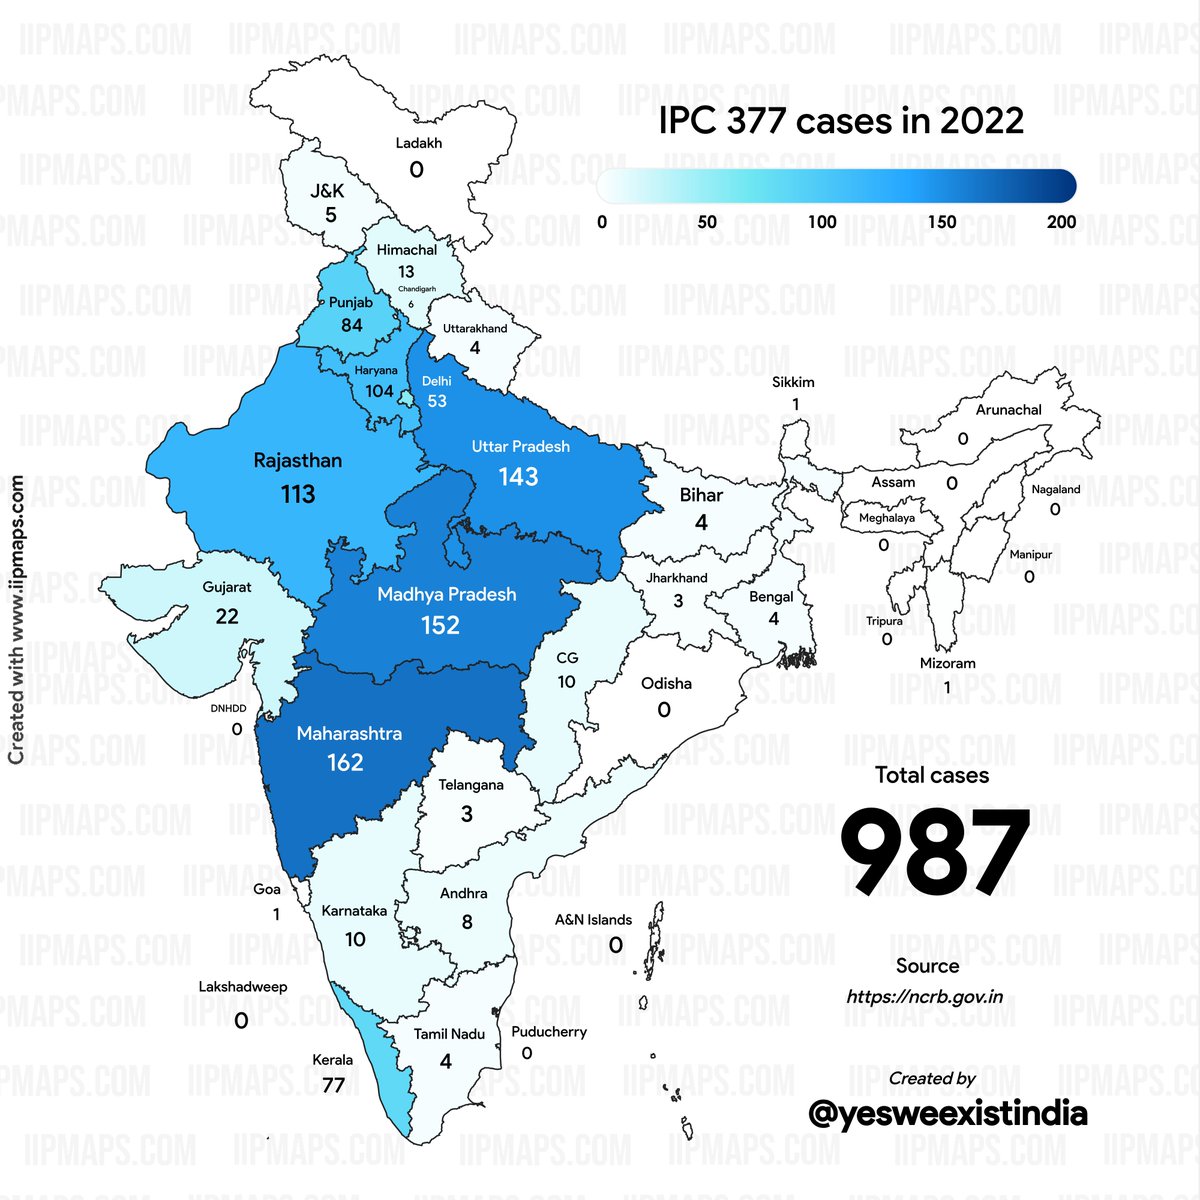 Number of cases under Section 377 in 2022 Created by Yes, We Exist - India @yesweexistindia using iipmaps com – the easiest way to create data maps. iipmaps com/view/ipc+377+cases+in+2022-F6DT65jd5gbHUajzxGMm